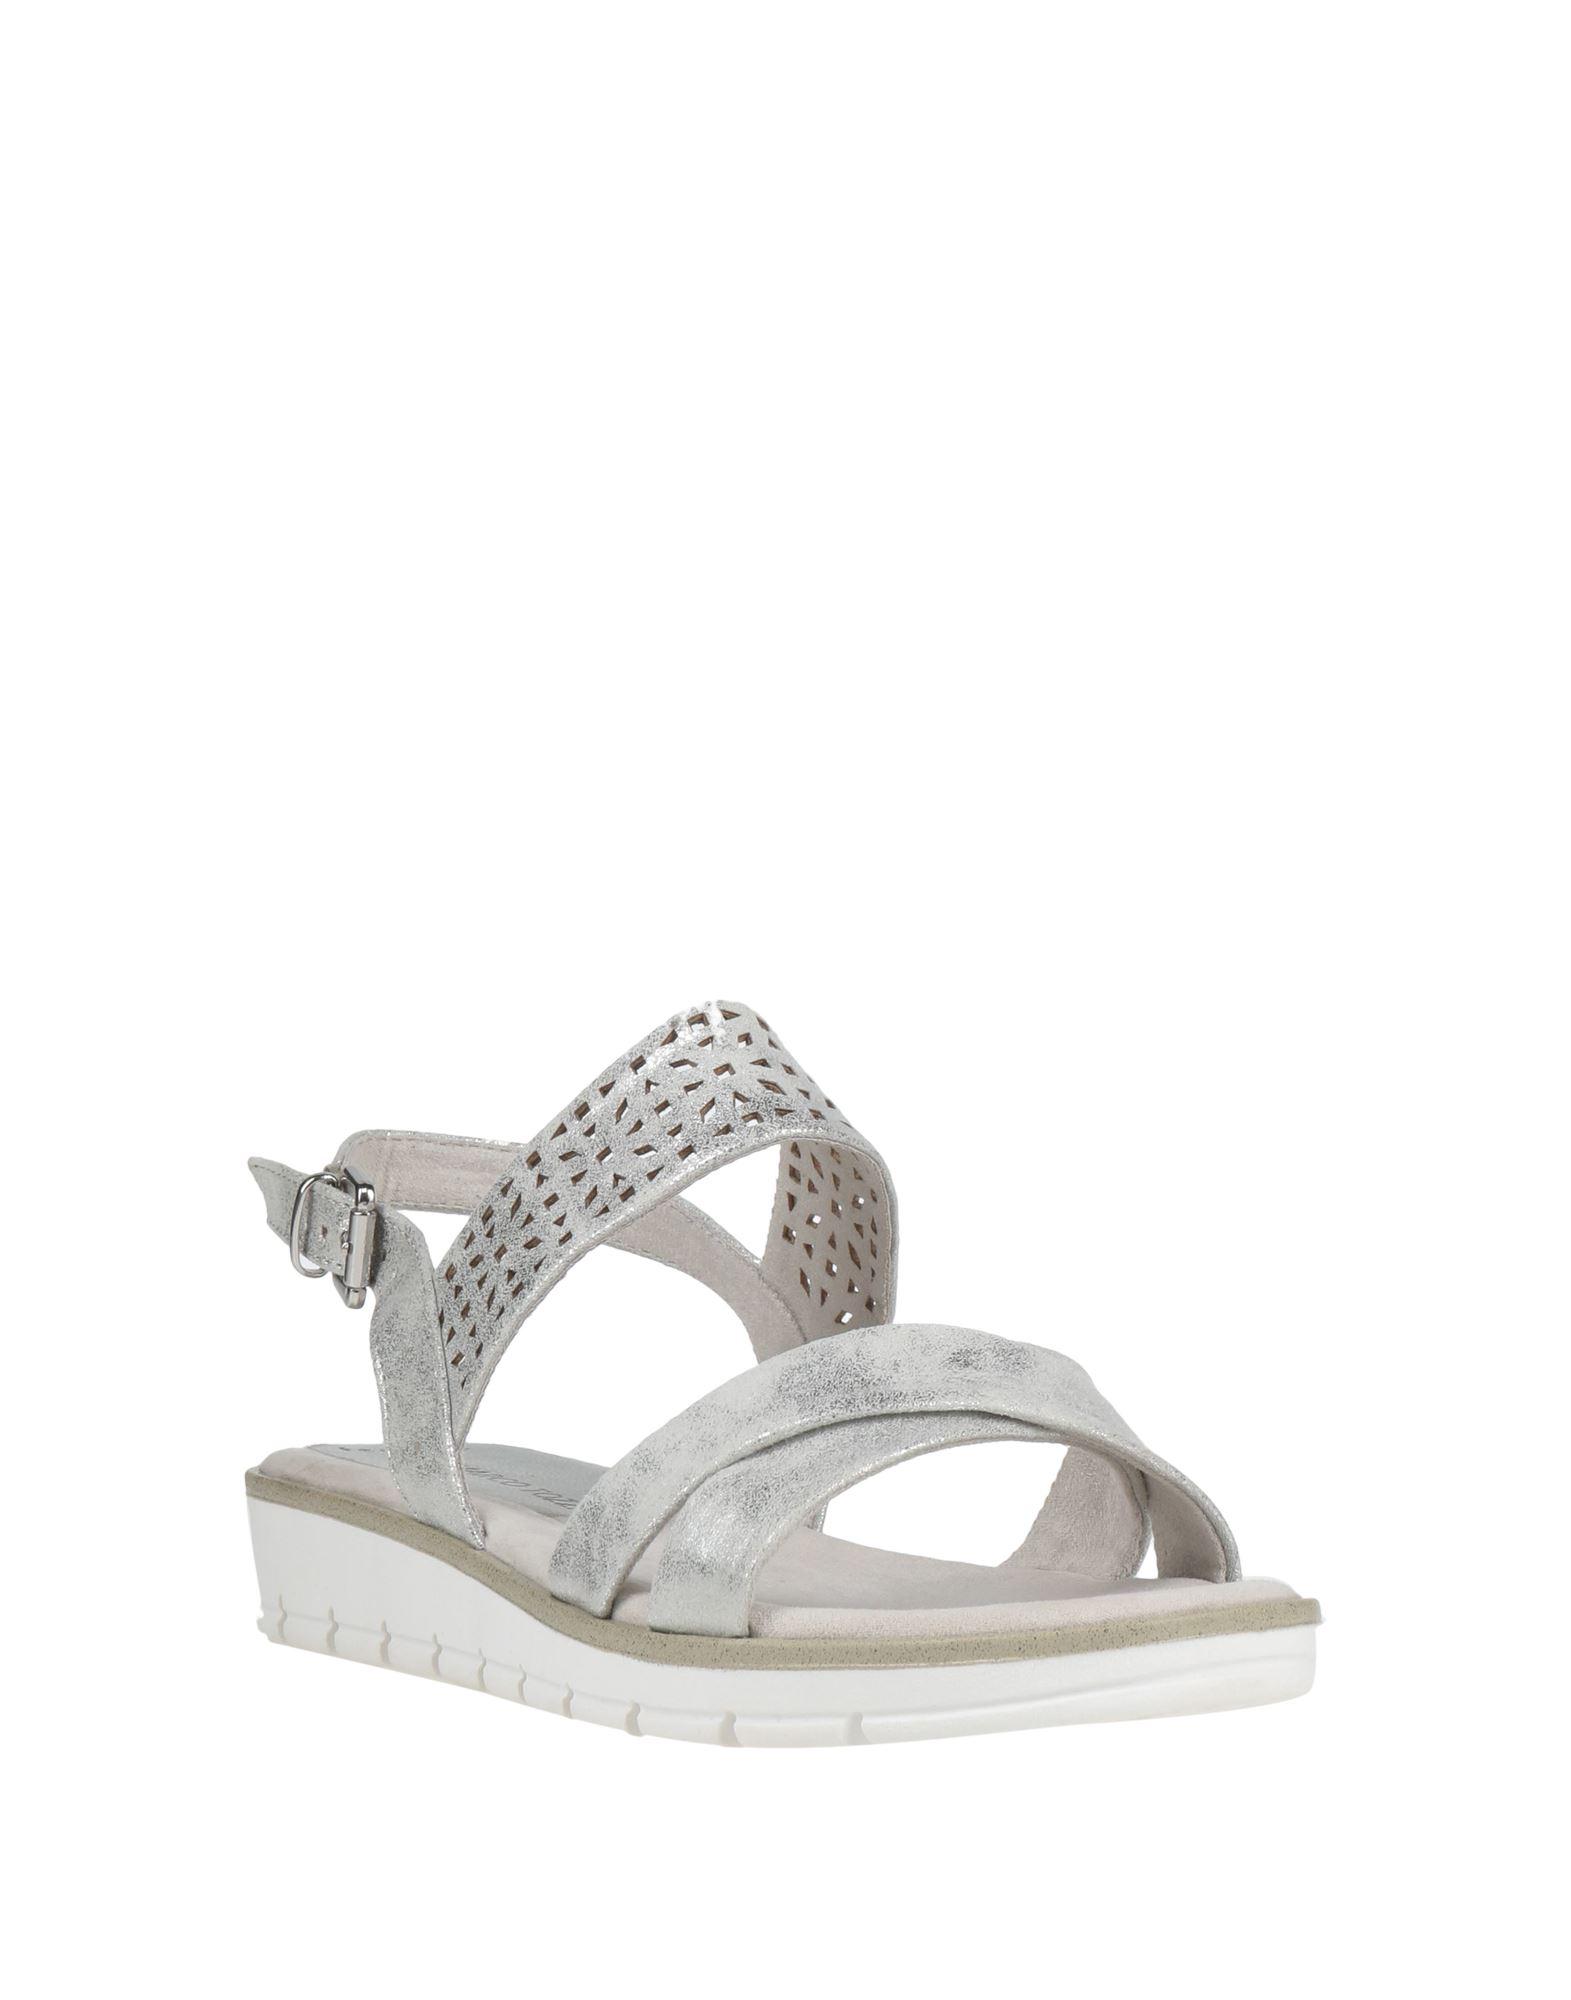 Marco Tozzi Sandals in Lyst